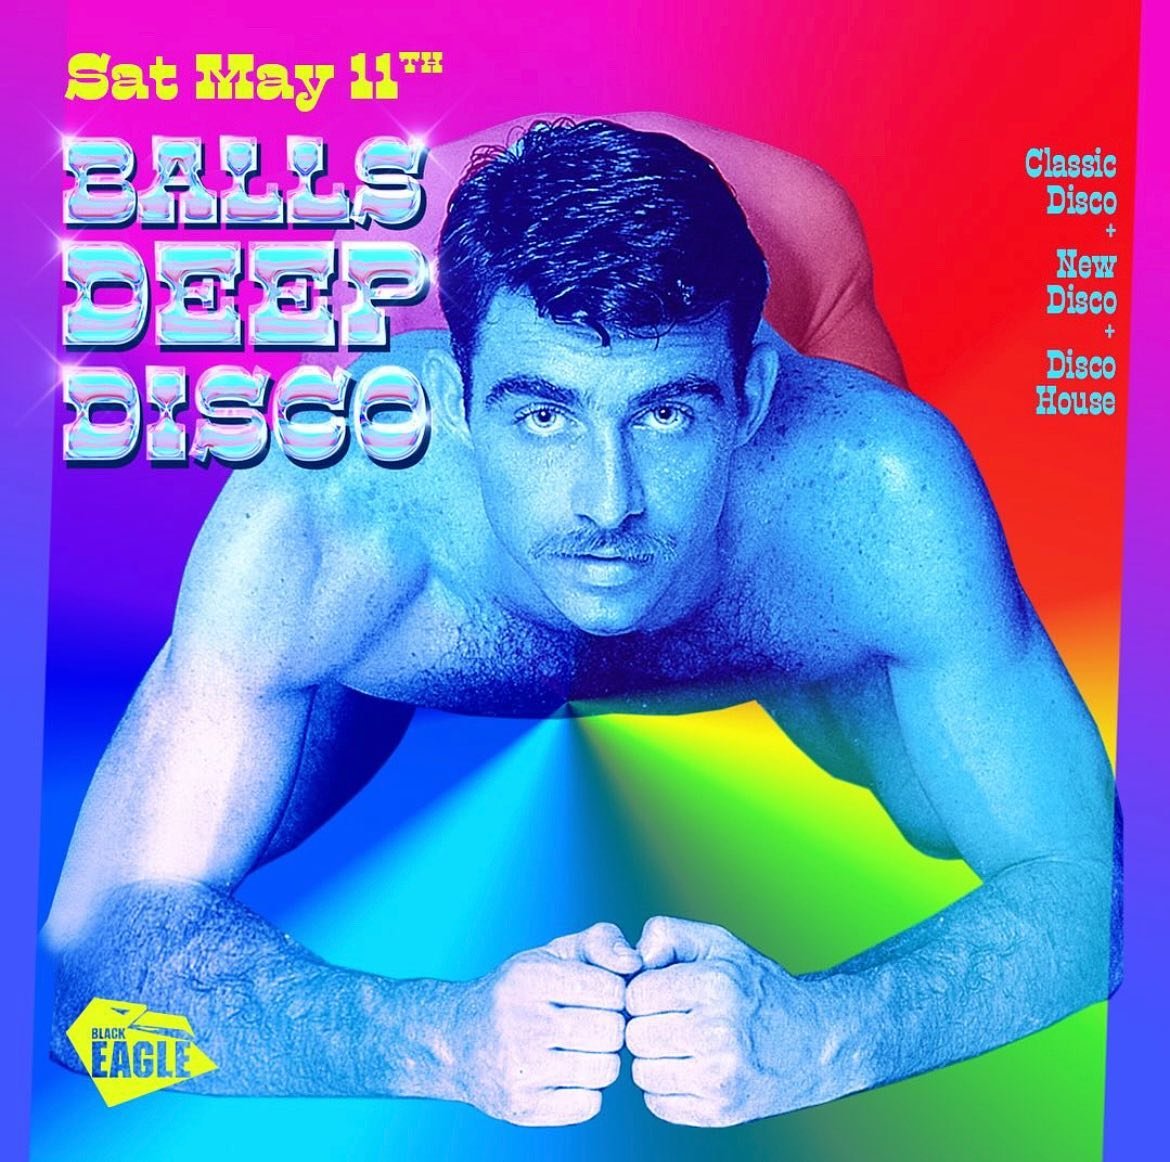 Tonight! @ballsdeepdisko is back! Come out and groove on this overcast Saturday to get your spirits high. @burnbabyburndisco and @the_robotickid got you covered for the music. Party starts at 9PM!